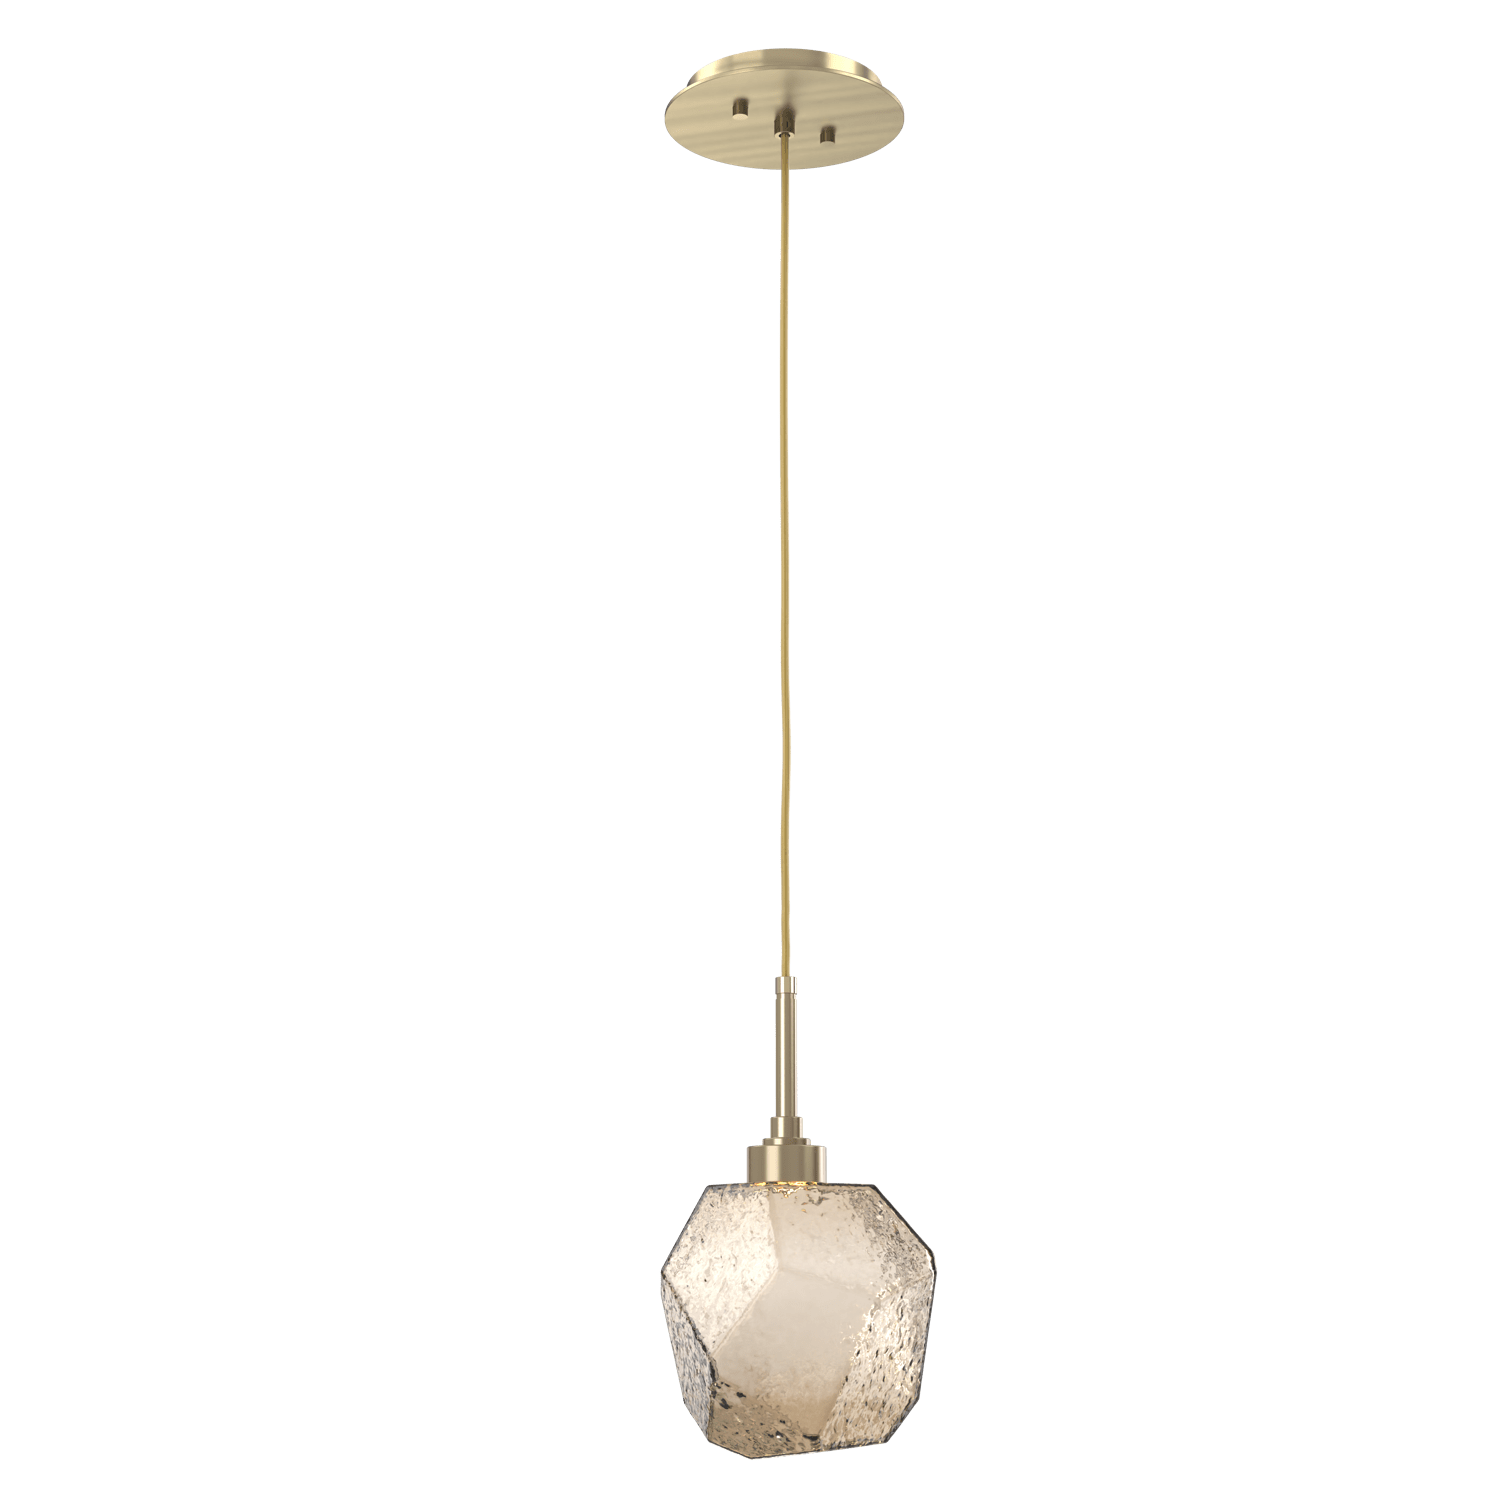 LAB0039-01-HB-B-Hammerton-Studio-Gem-pendant-light-with-heritage-brass-finish-and-bronze-blown-glass-shades-and-LED-lamping